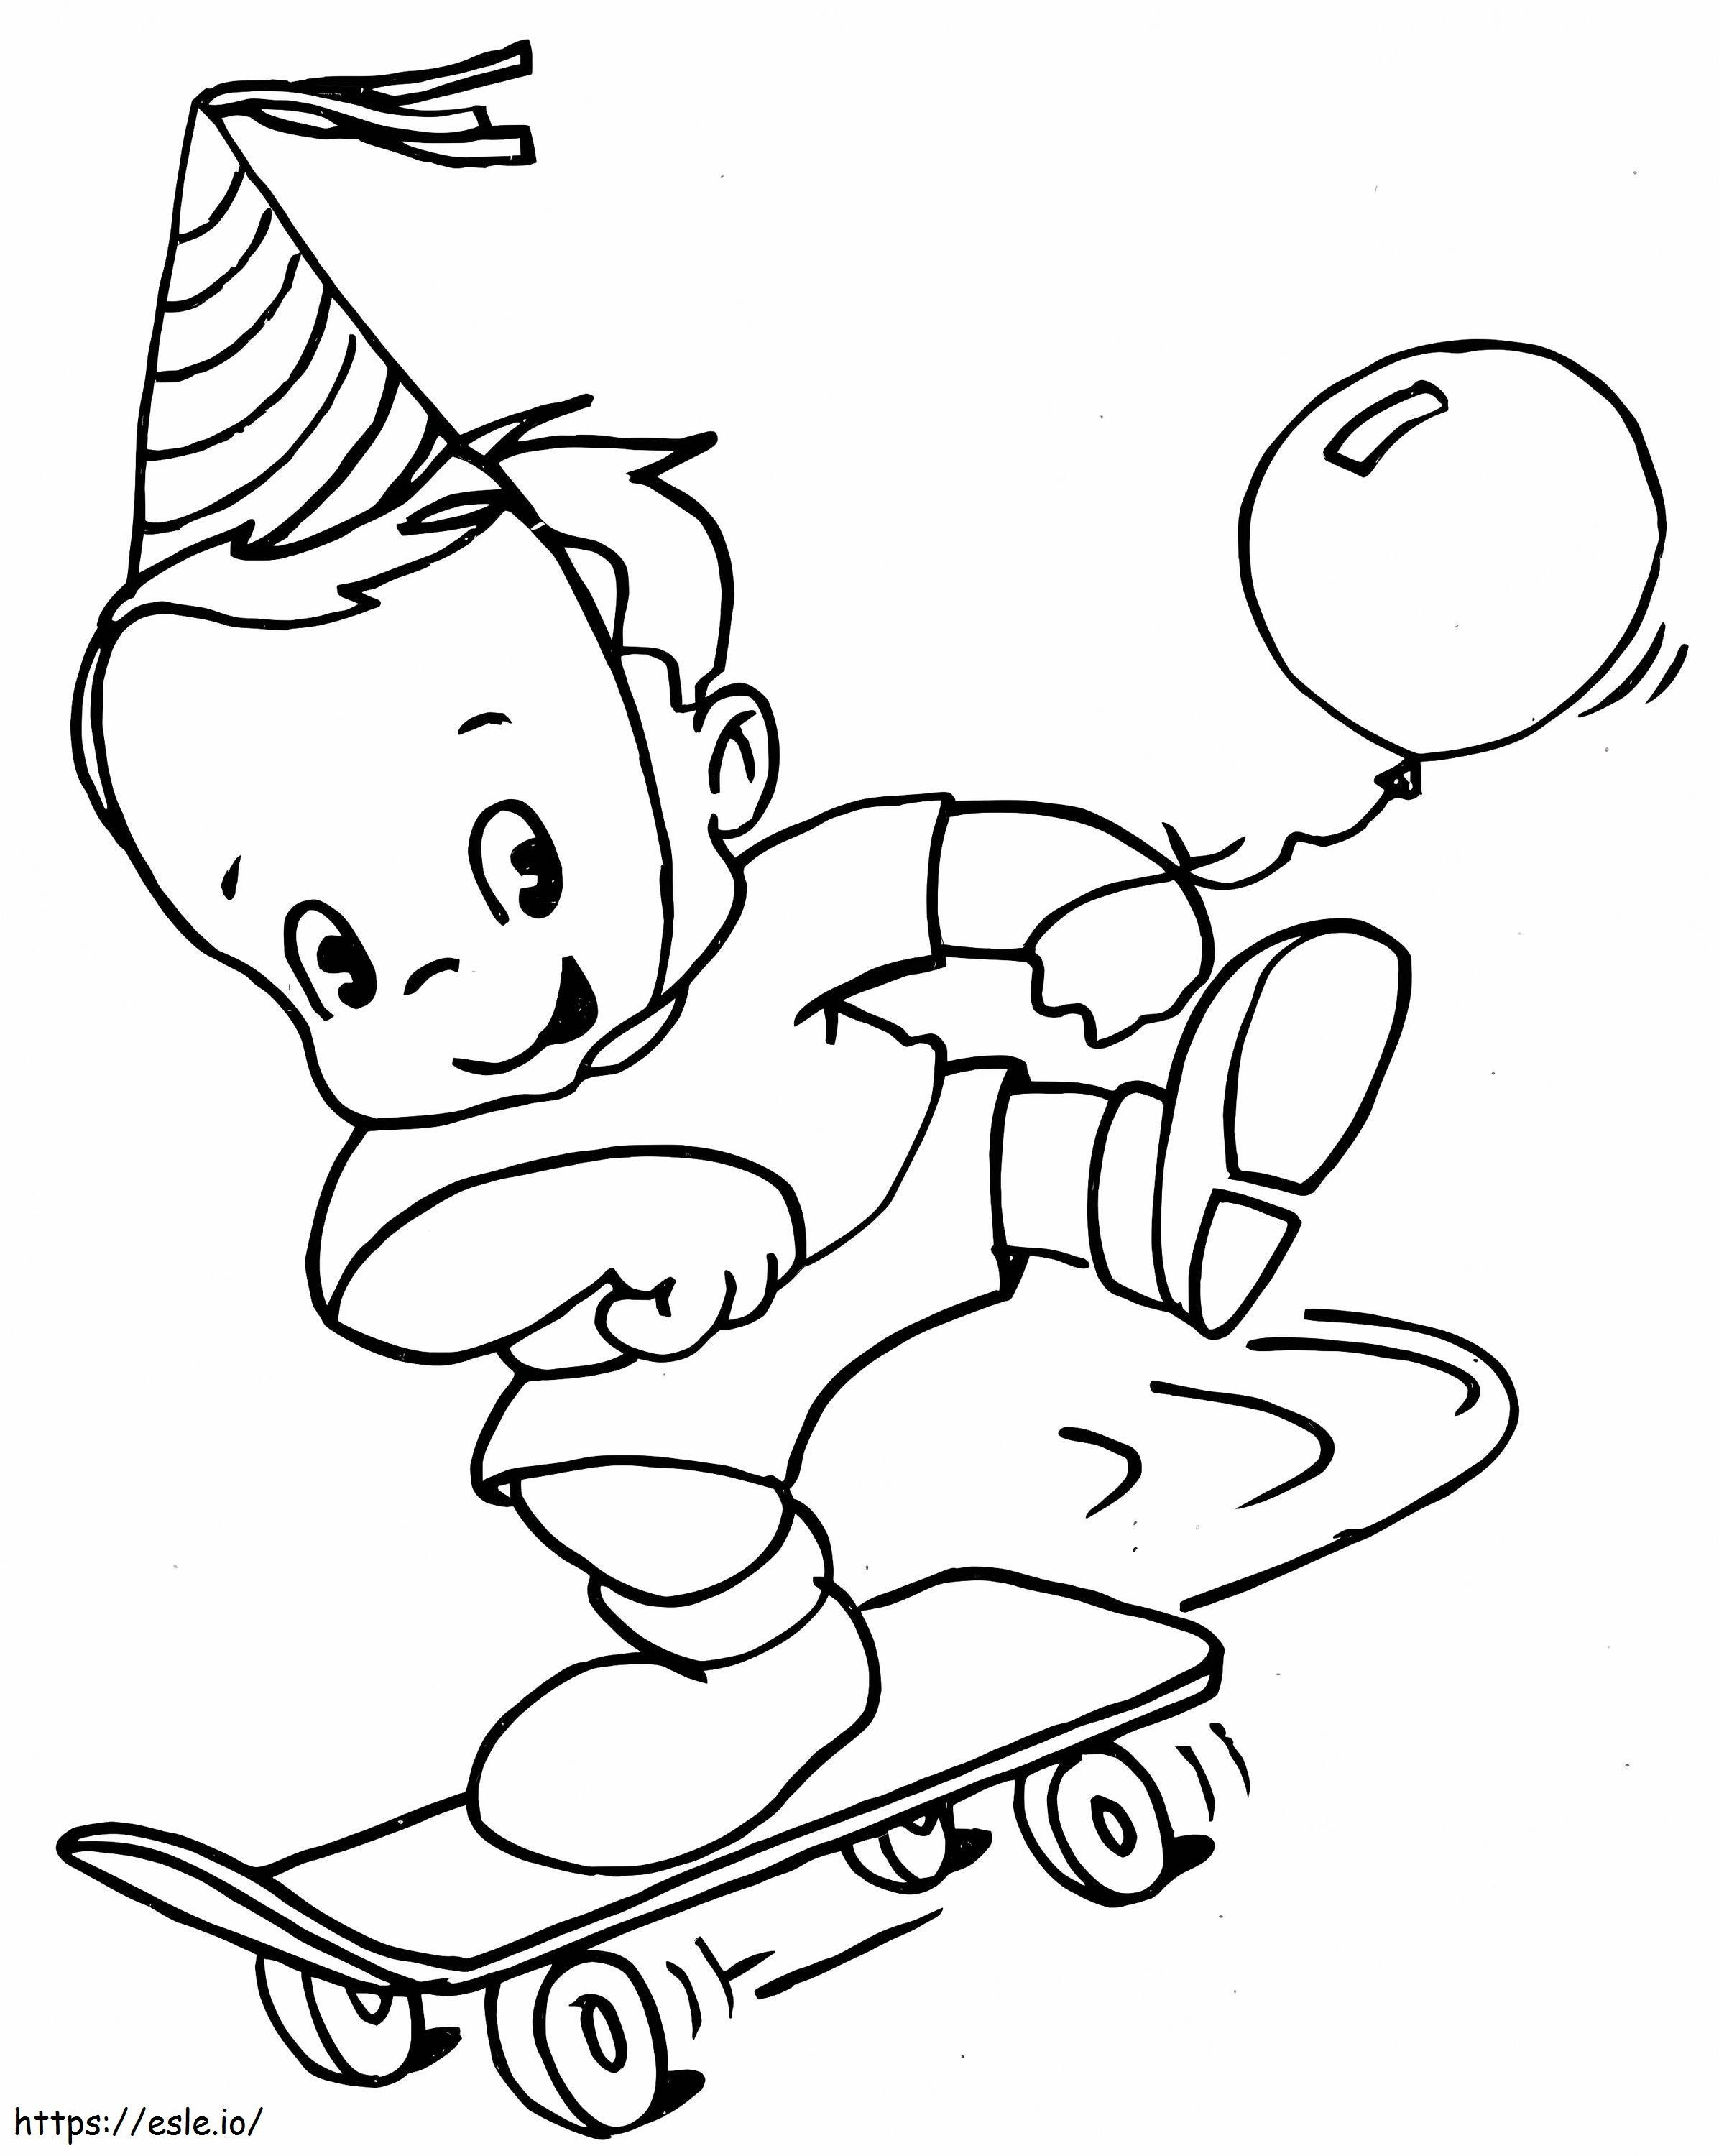 A Boy With A Skateboard coloring page